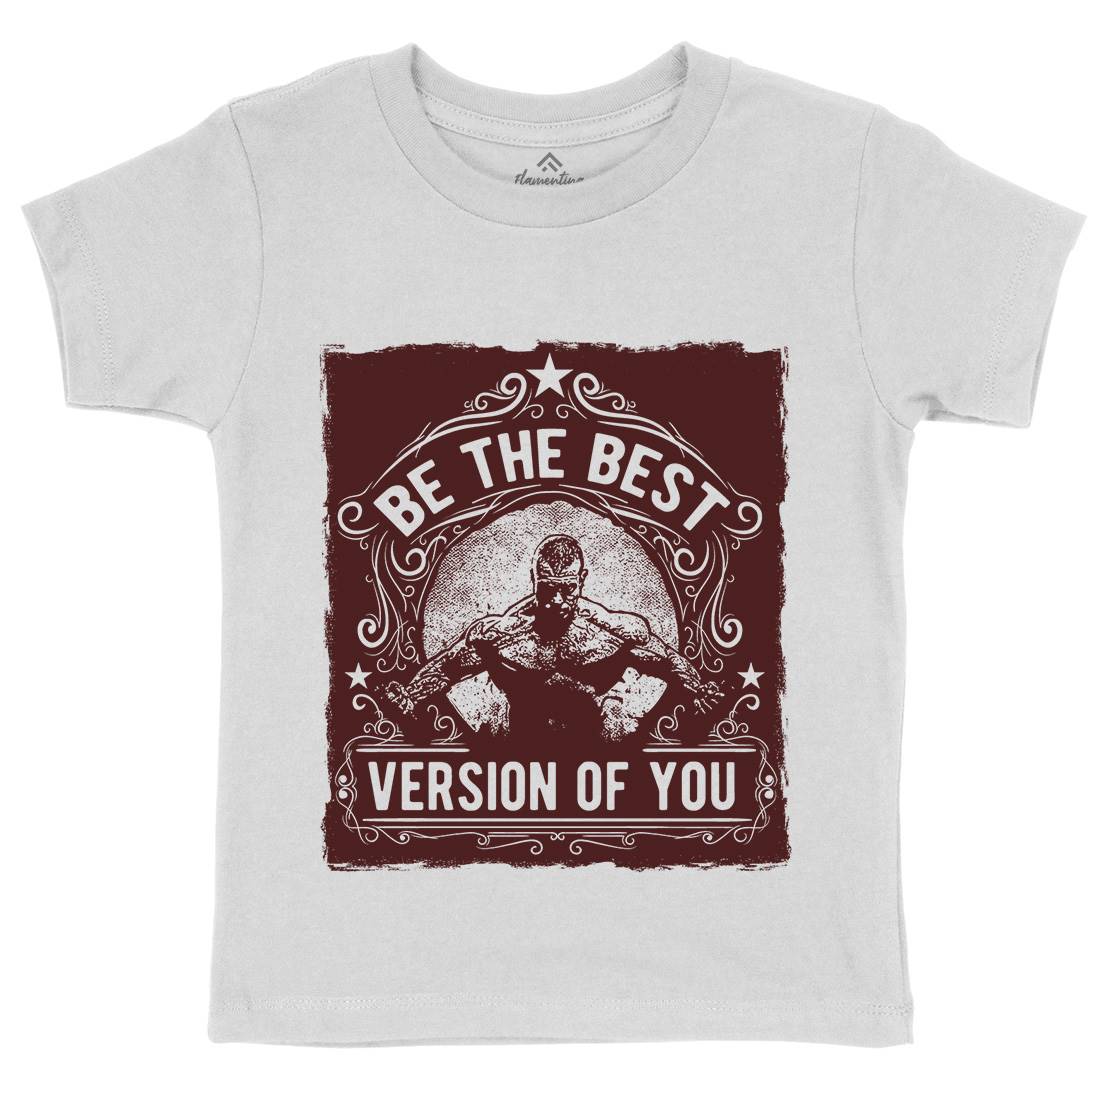 The Best Version Of You Kids Organic Crew Neck T-Shirt Gym C985